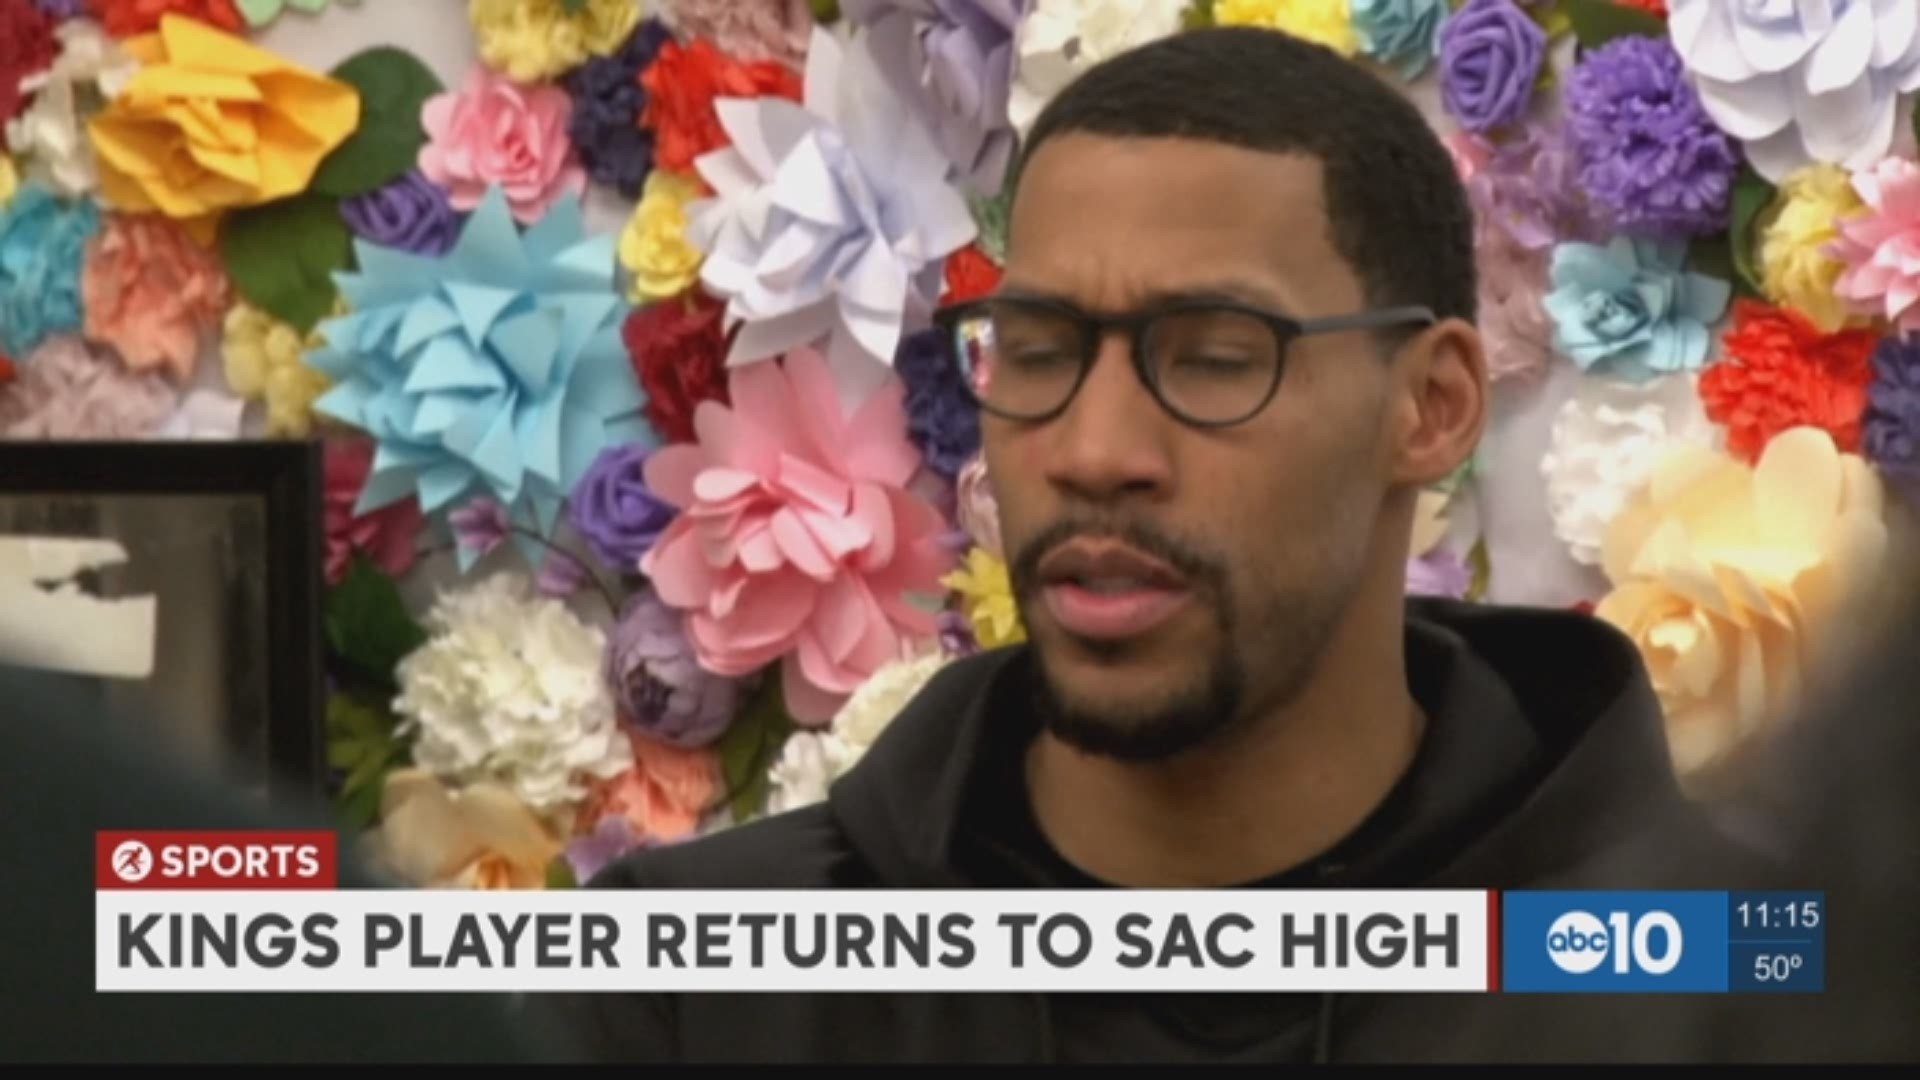 Kings forward Garrett Temple, who adopted Sacramento Charter High School, returns to the Oak Park campus on Wednesday to have an open conversation with students about some sensitive topics.